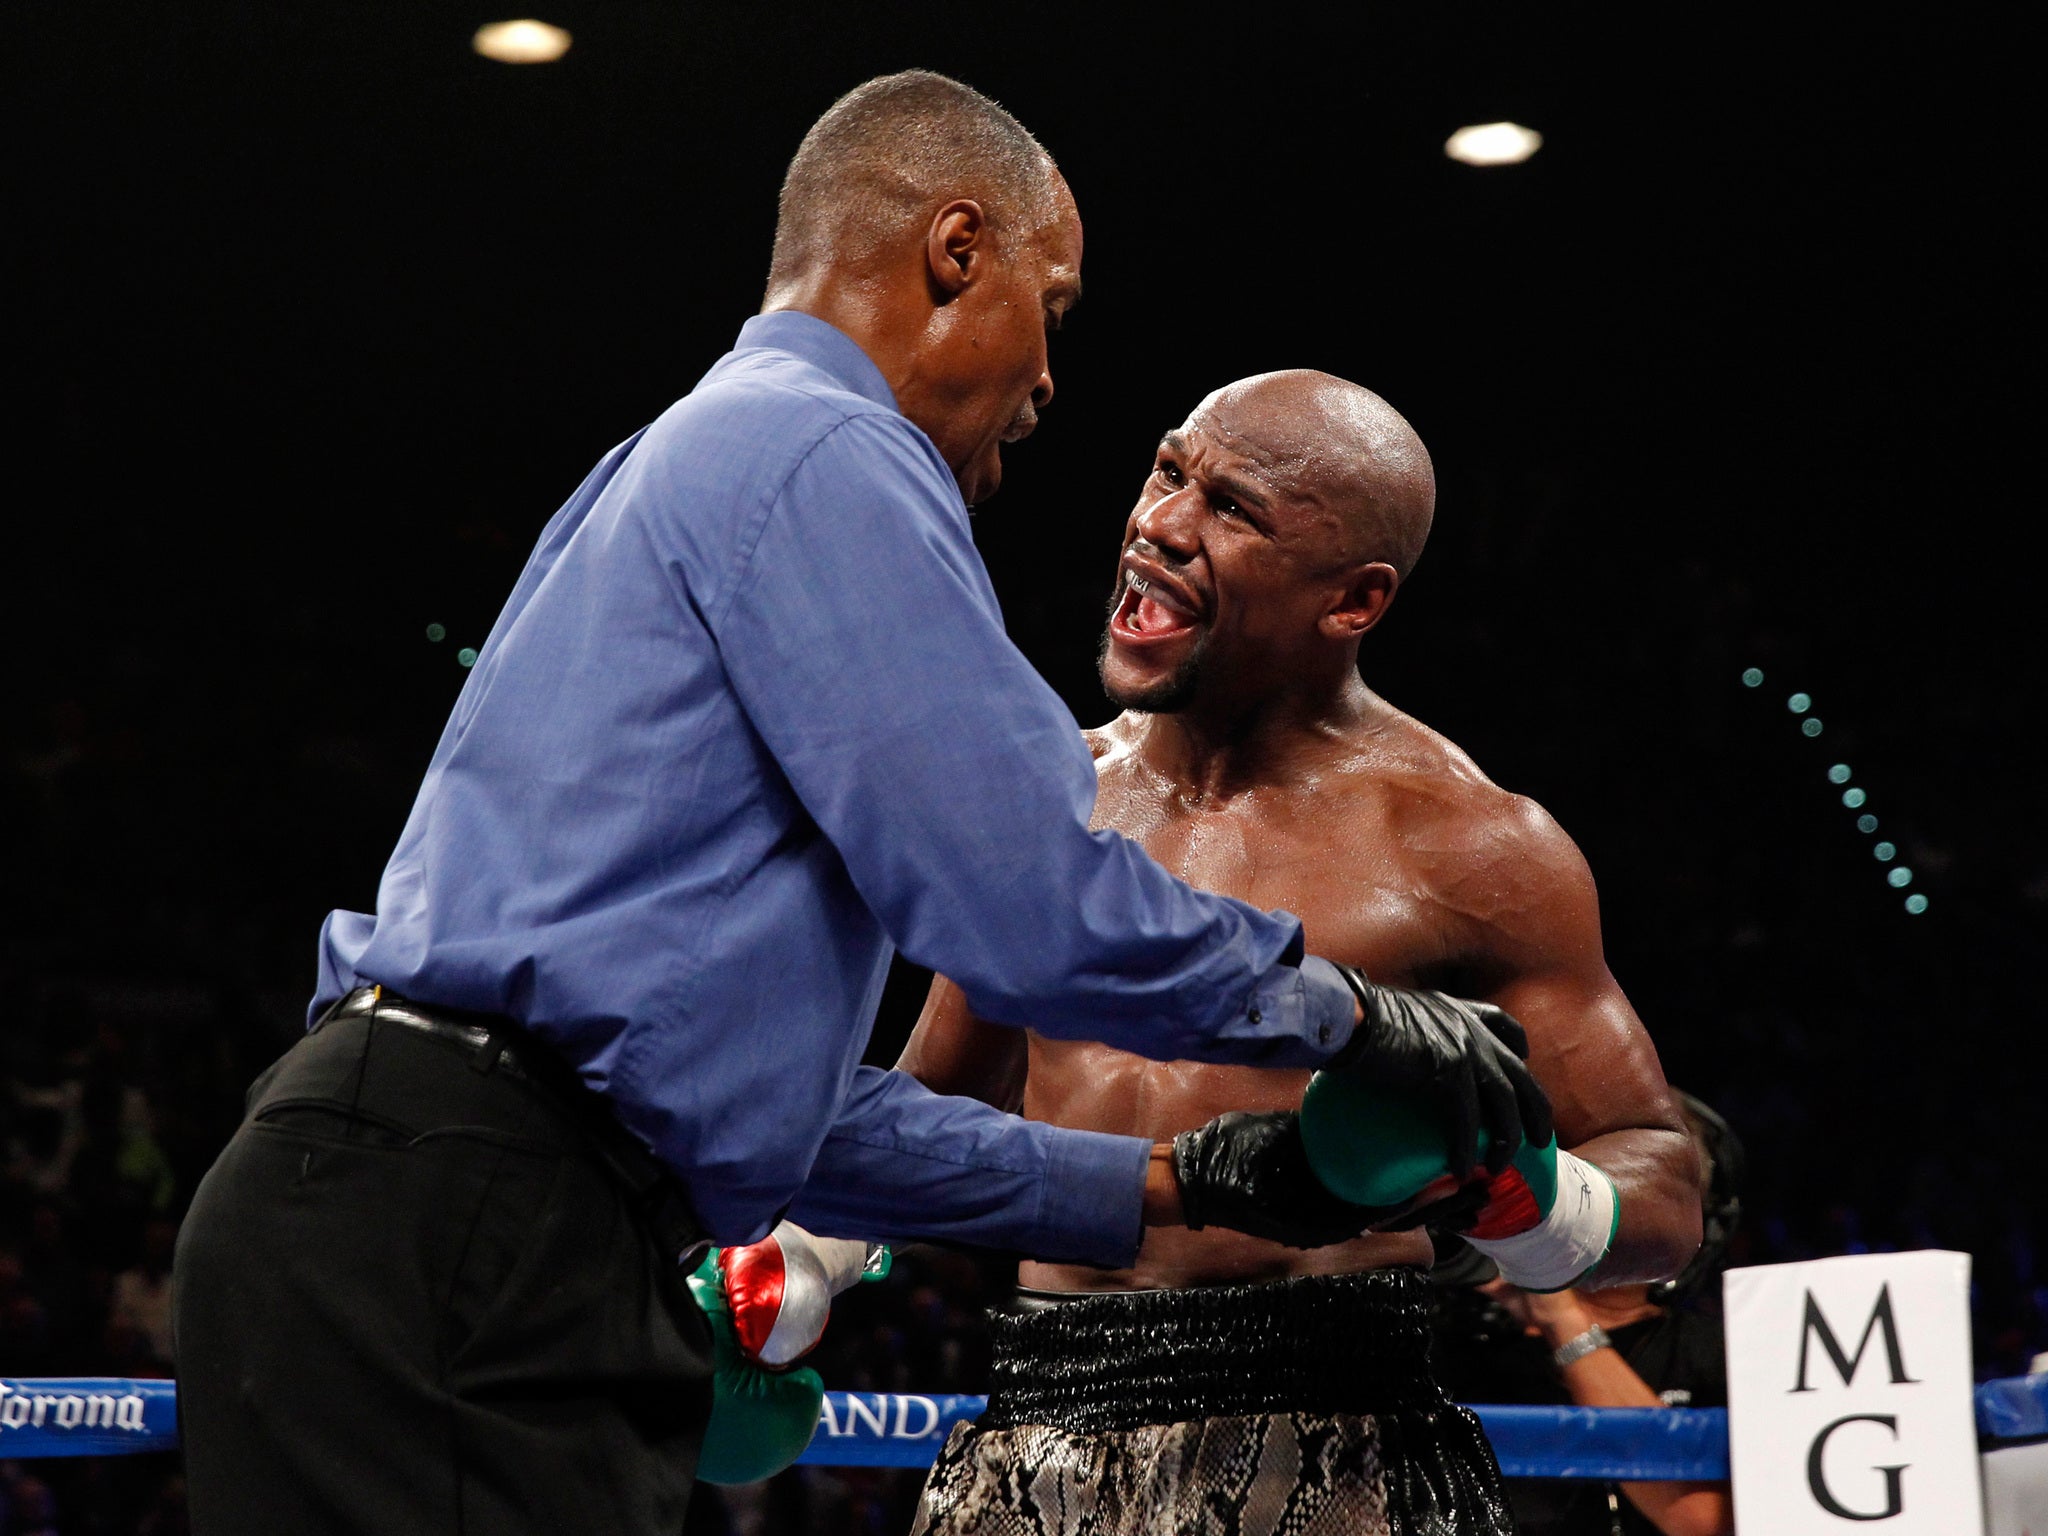 Floyd Mayweather Jr complained that Marcos Maidana bit him as referee Kenny Bayless examines his glove